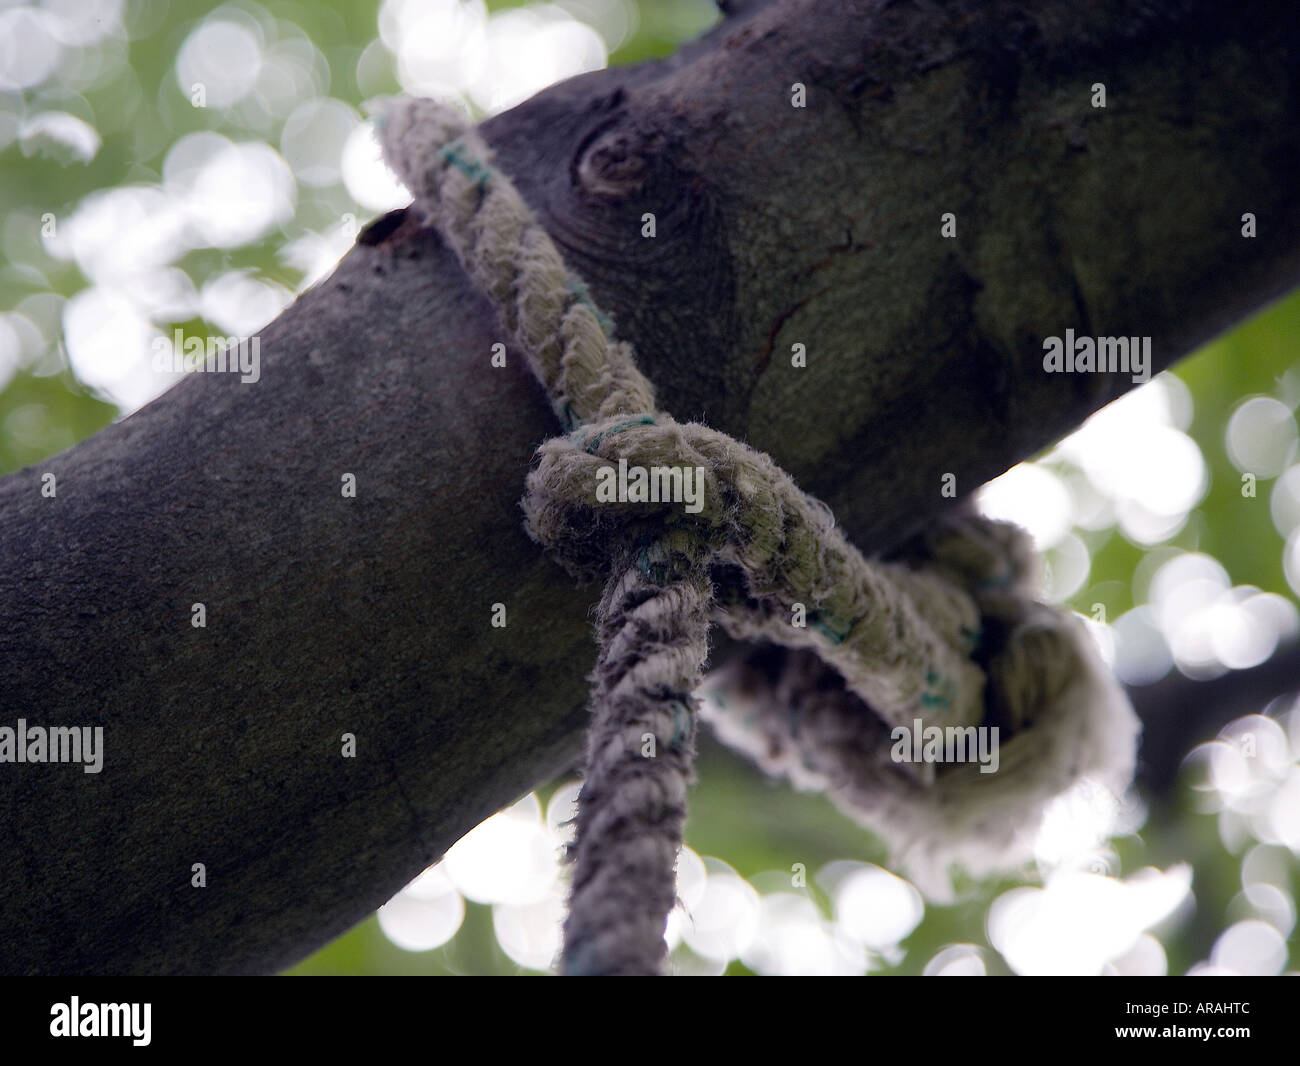 Rope knot on a tree branch Stock Photo - Alamy